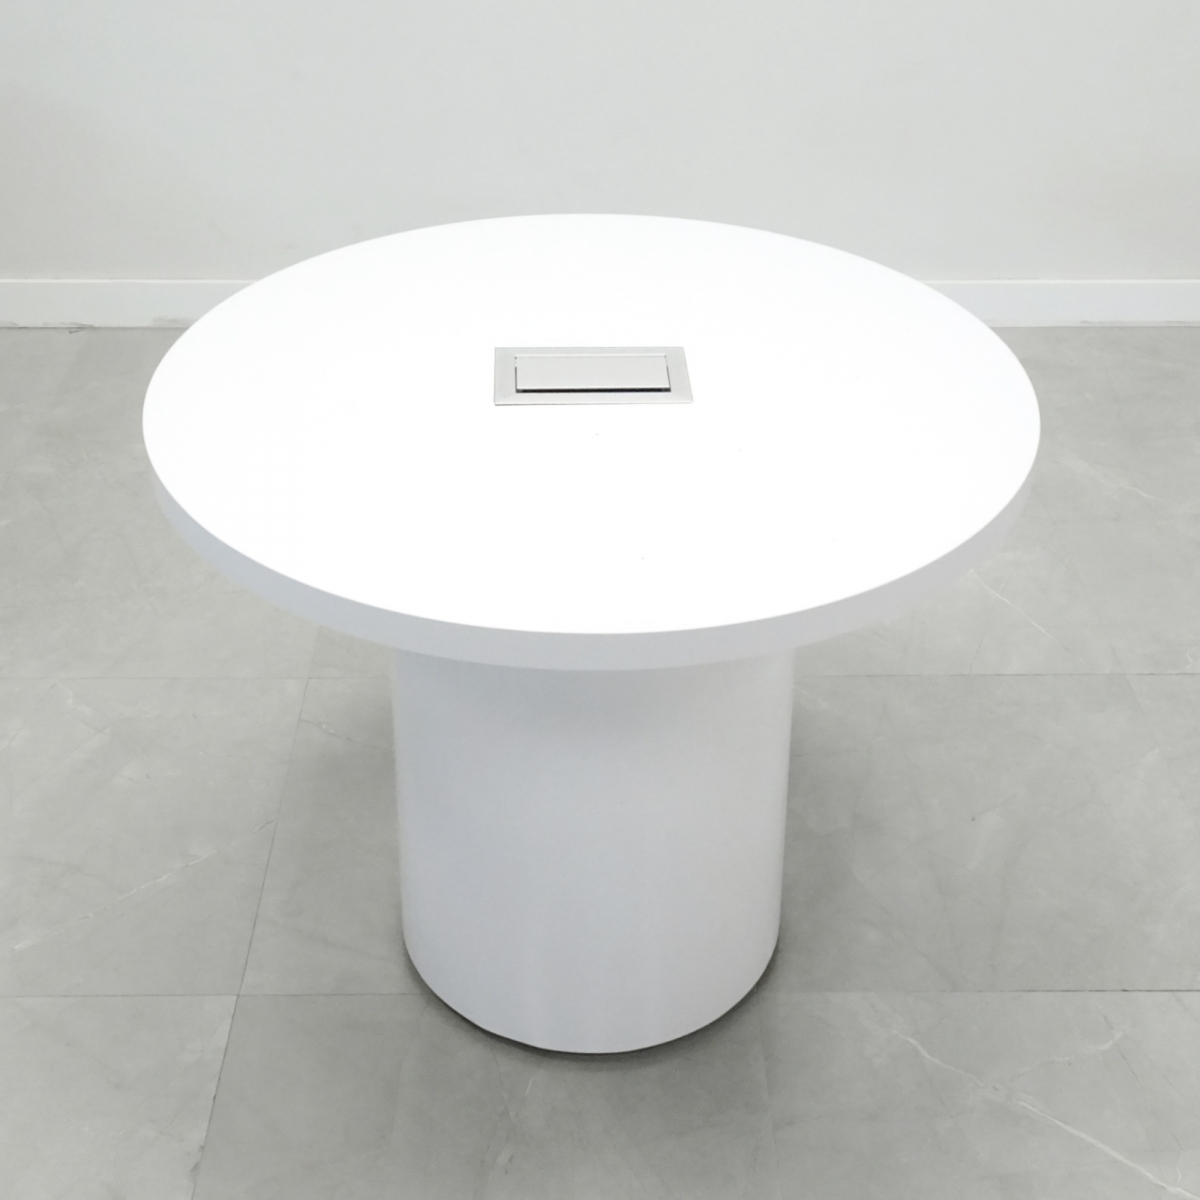 48 In. Axis Round Gloss Meeting Table -Stock # 1001-D